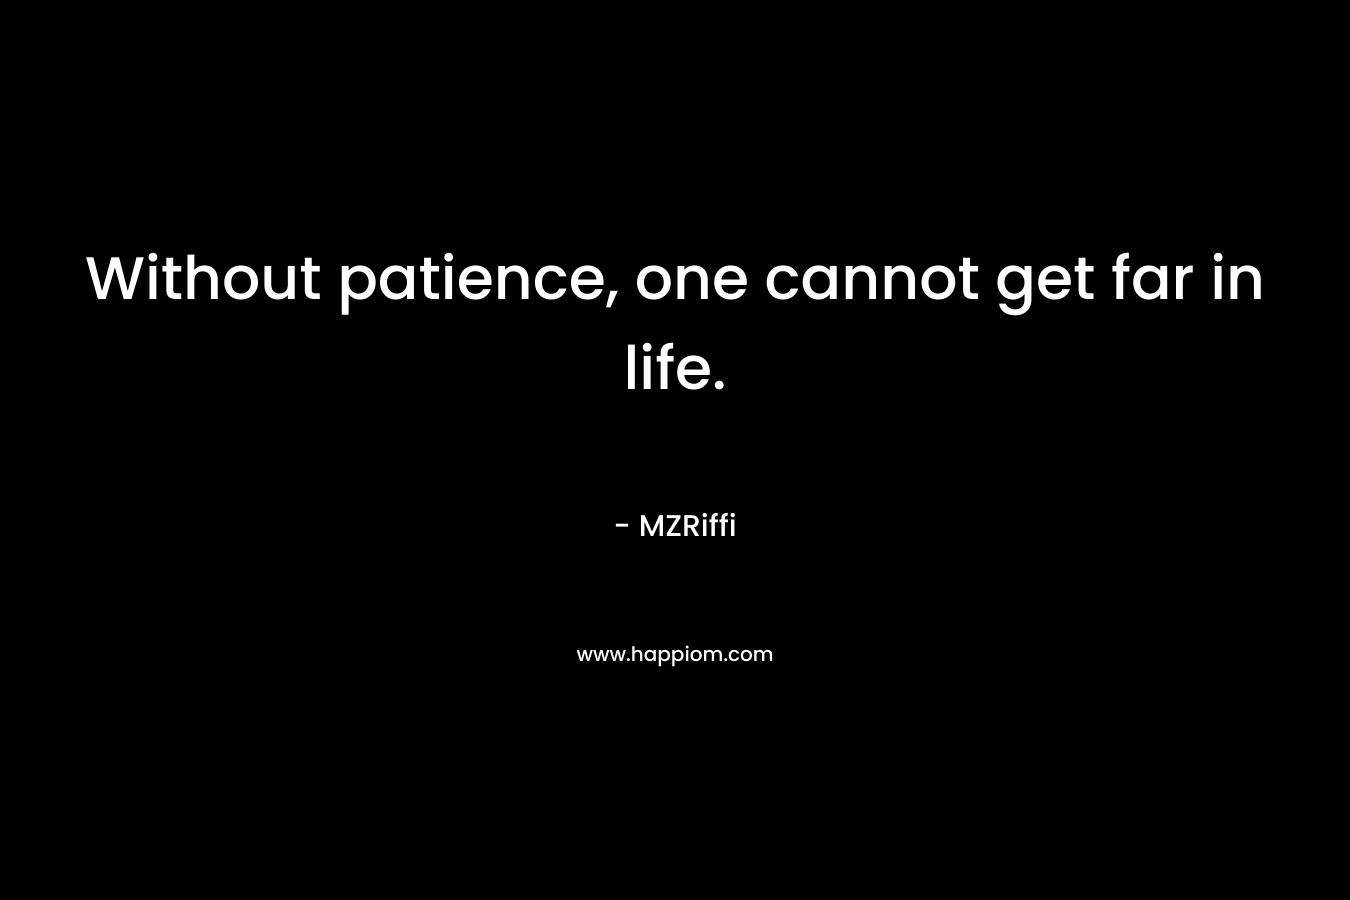 Without patience, one cannot get far in life. – MZRiffi